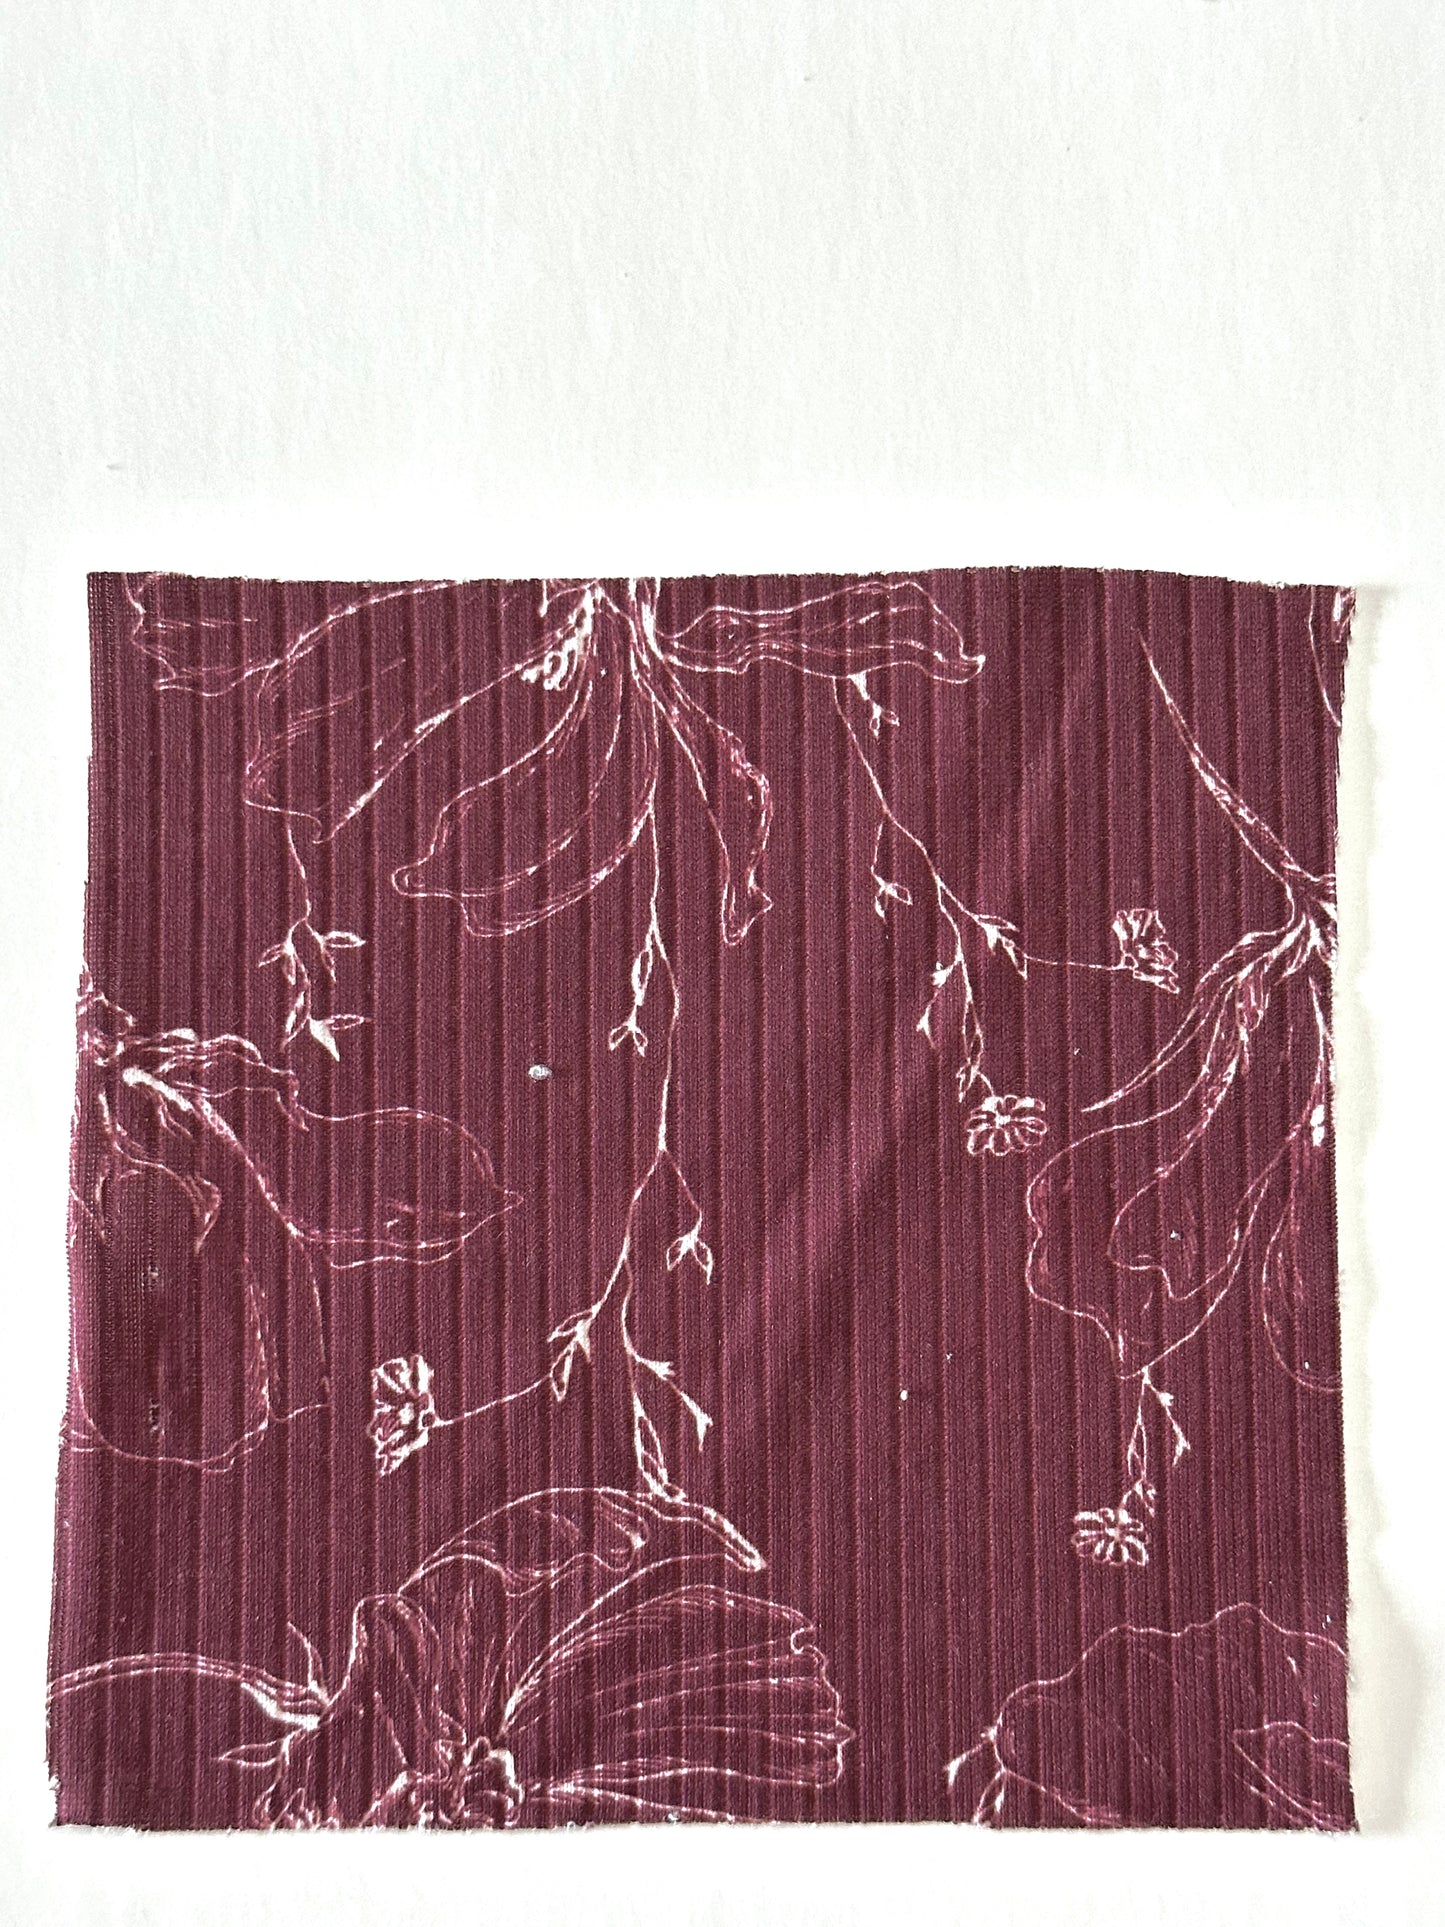 Pre-Order Poppy Floral in Burgundy on Unbrushed Rib Knit Fabric Sold by the 1/4 yard